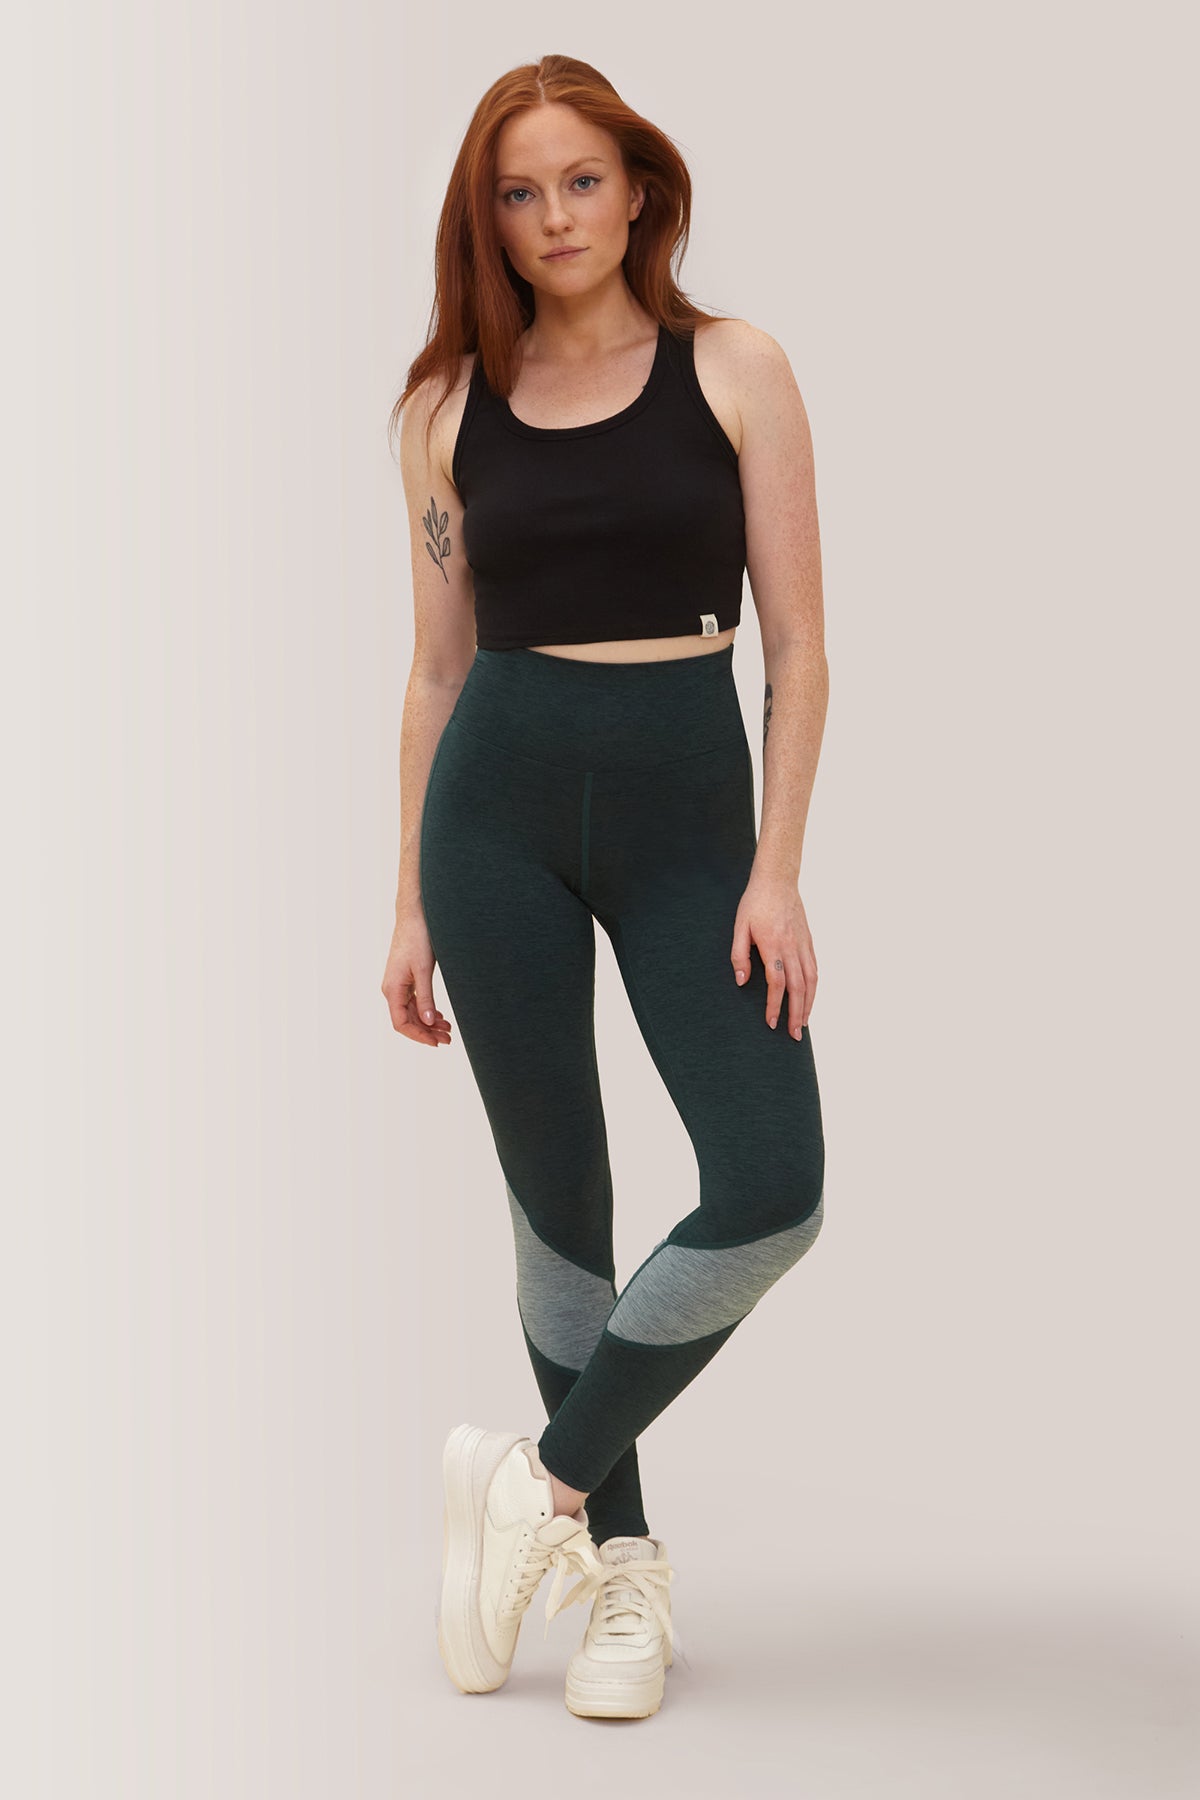 Femme qui porte les leggings Buttery Soft BFF High-Rise Keep Moving de Rose Boreal./ Women wearing the buttery soft BFF high-rise Keep Moving leggings from Rose Boreal. -Fern / Fougère